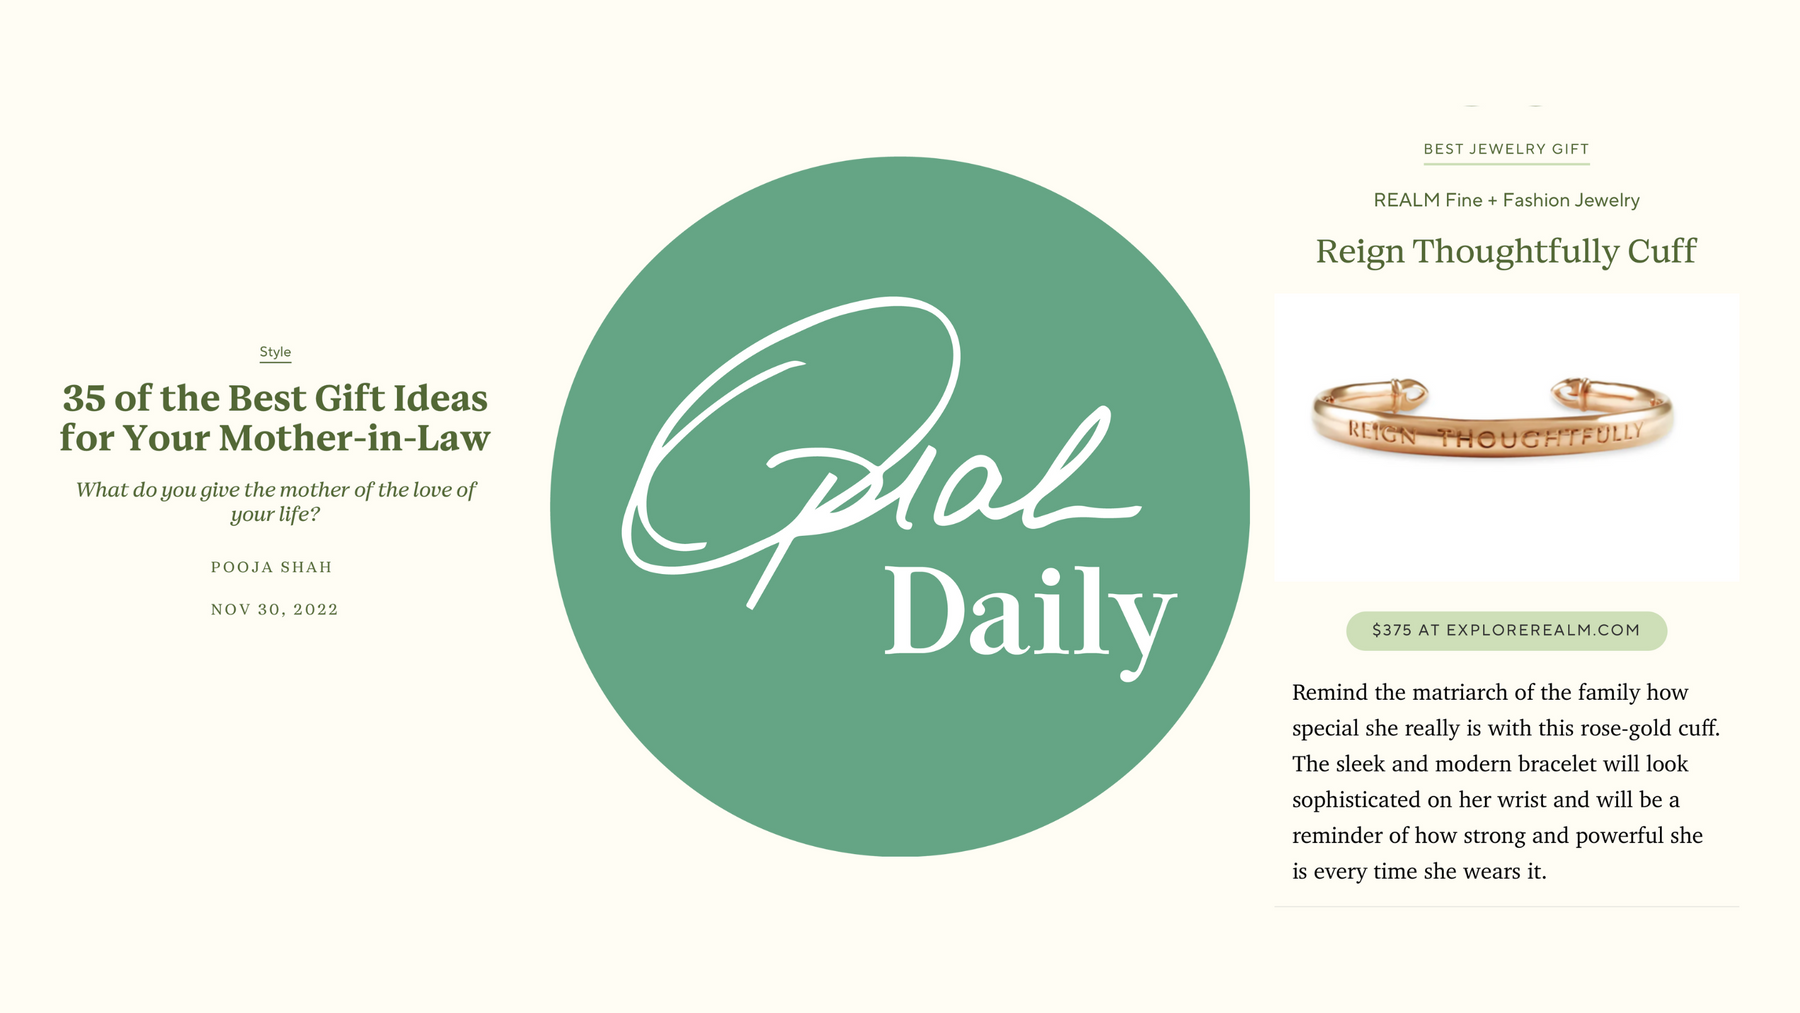 Oprah Daily features REALM Fine + Fashion Jewelry's Reign Thoughtfully Cuff as a 